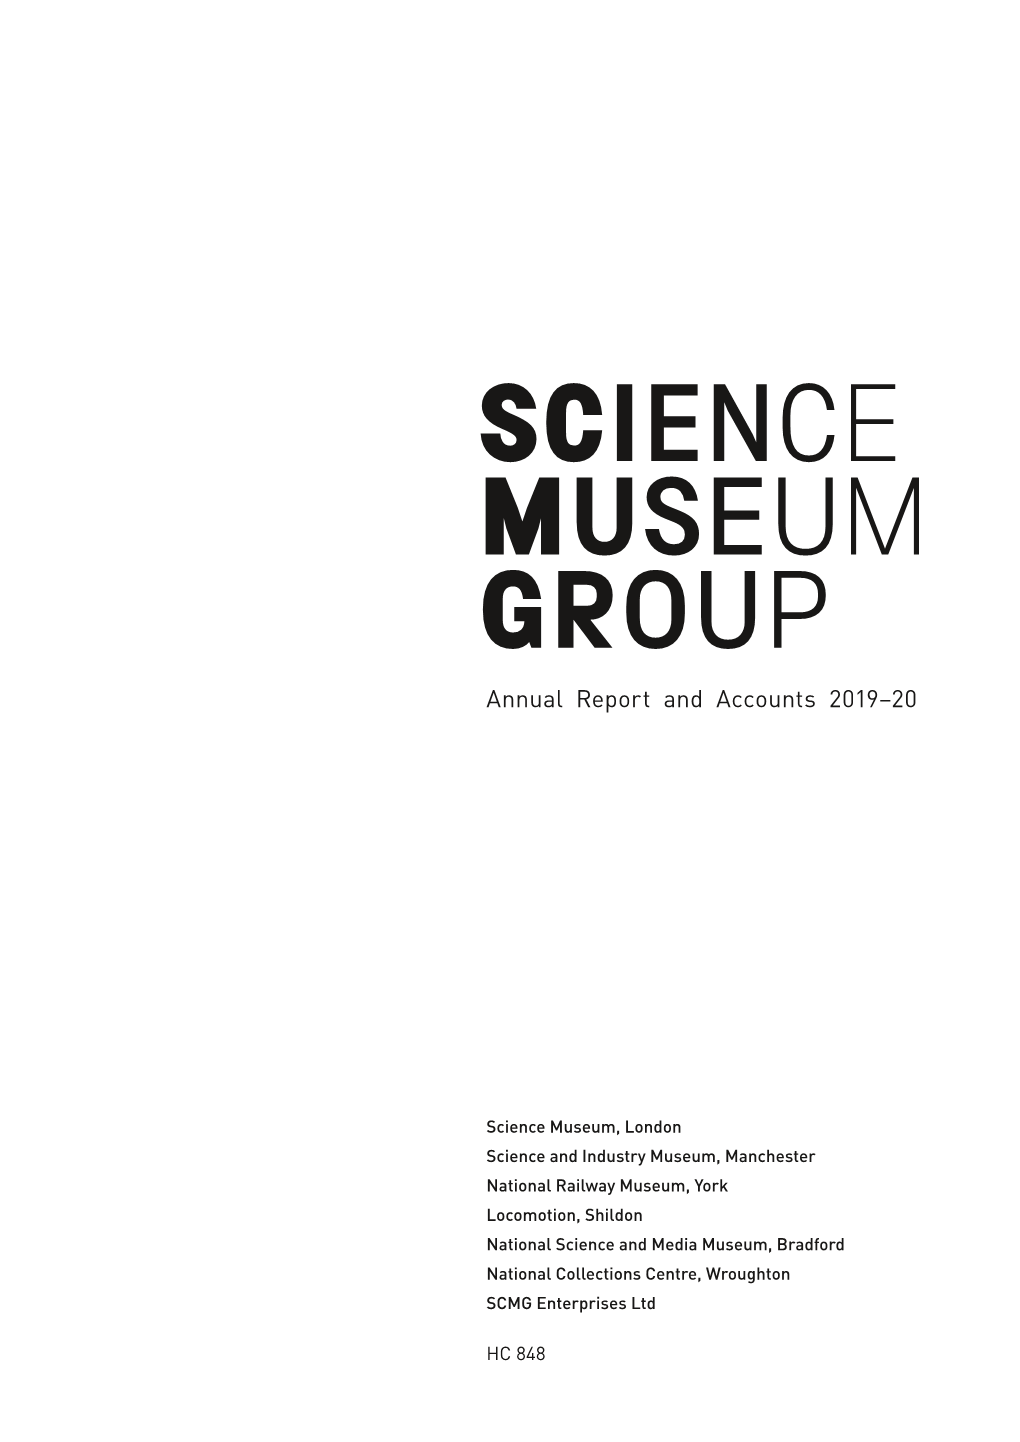 HC 848 – Science Museum Group Annual Report and Accounts 2019-20